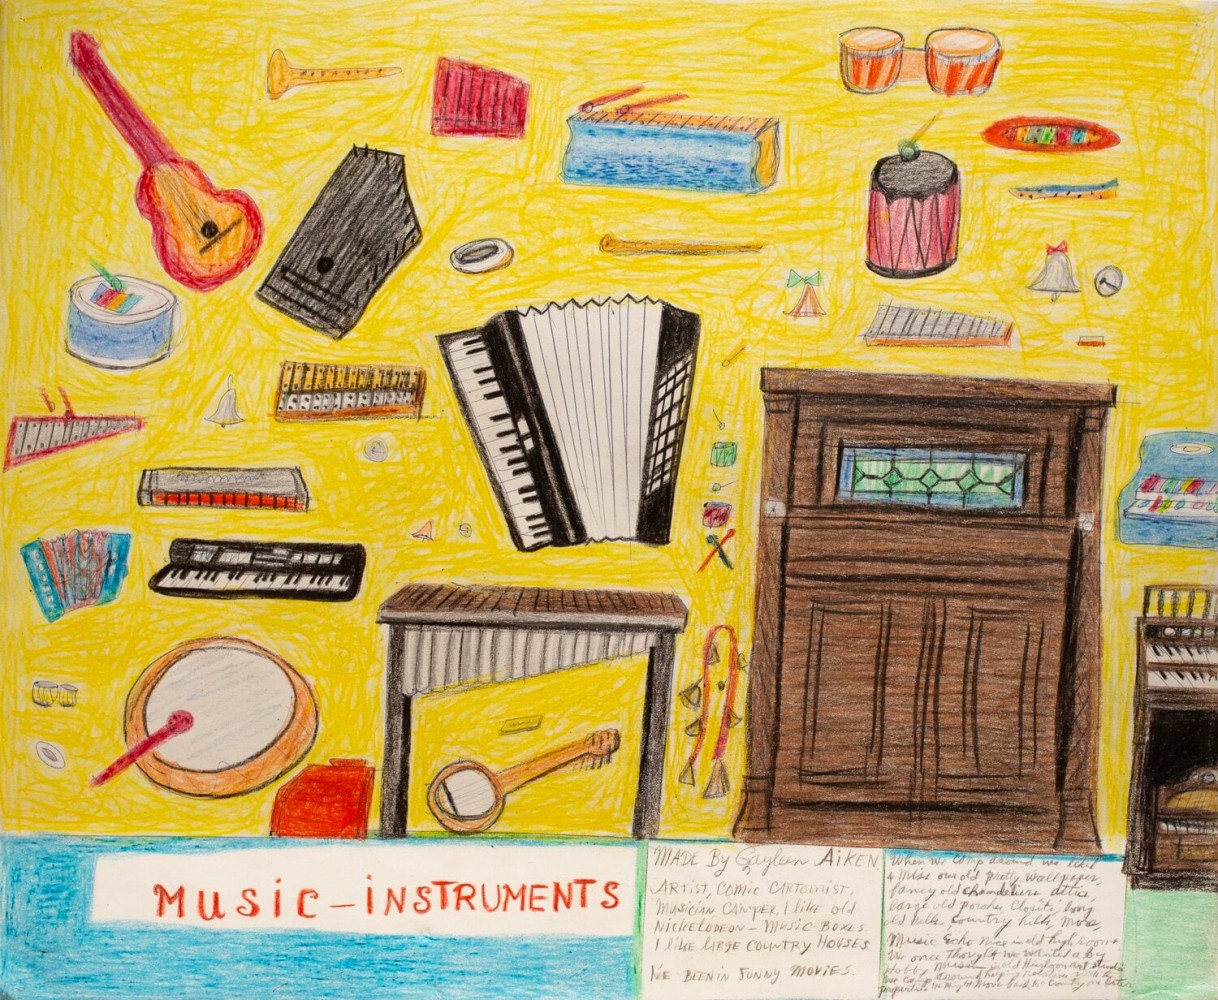 Gayleen Aiken
Music - instruments, 2002
Colored pencil, ballpoint pen, and crayon on paper
14 x 17 inches